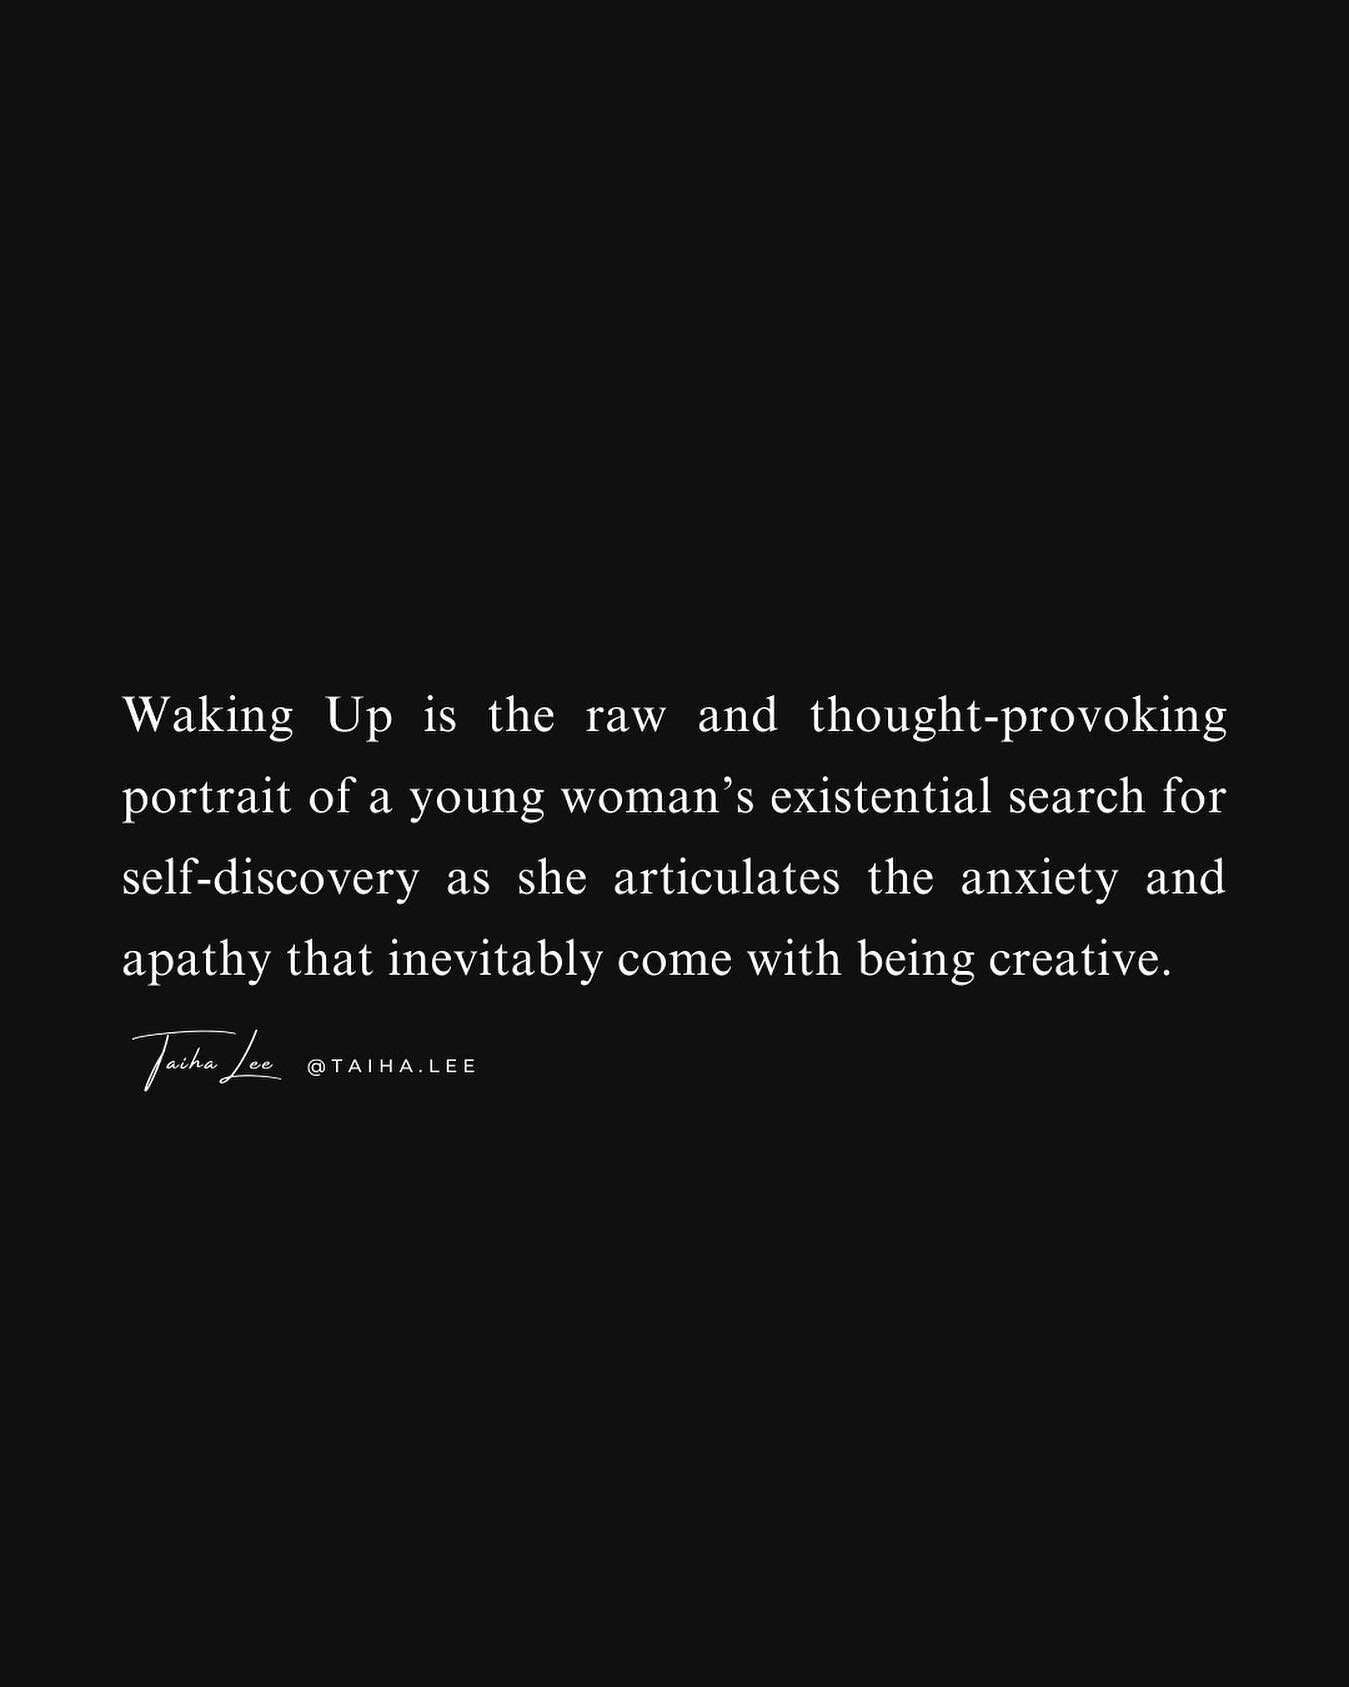 Waking Up is the raw and thought-provoking portrait of a young woman's existential search for self-discovery as she articulates the anxiety and apathy that inevitably come with being creative. 
⠀⠀⠀⠀⠀⠀⠀⠀⠀
A piece of the official 'Waking Up' book blurb